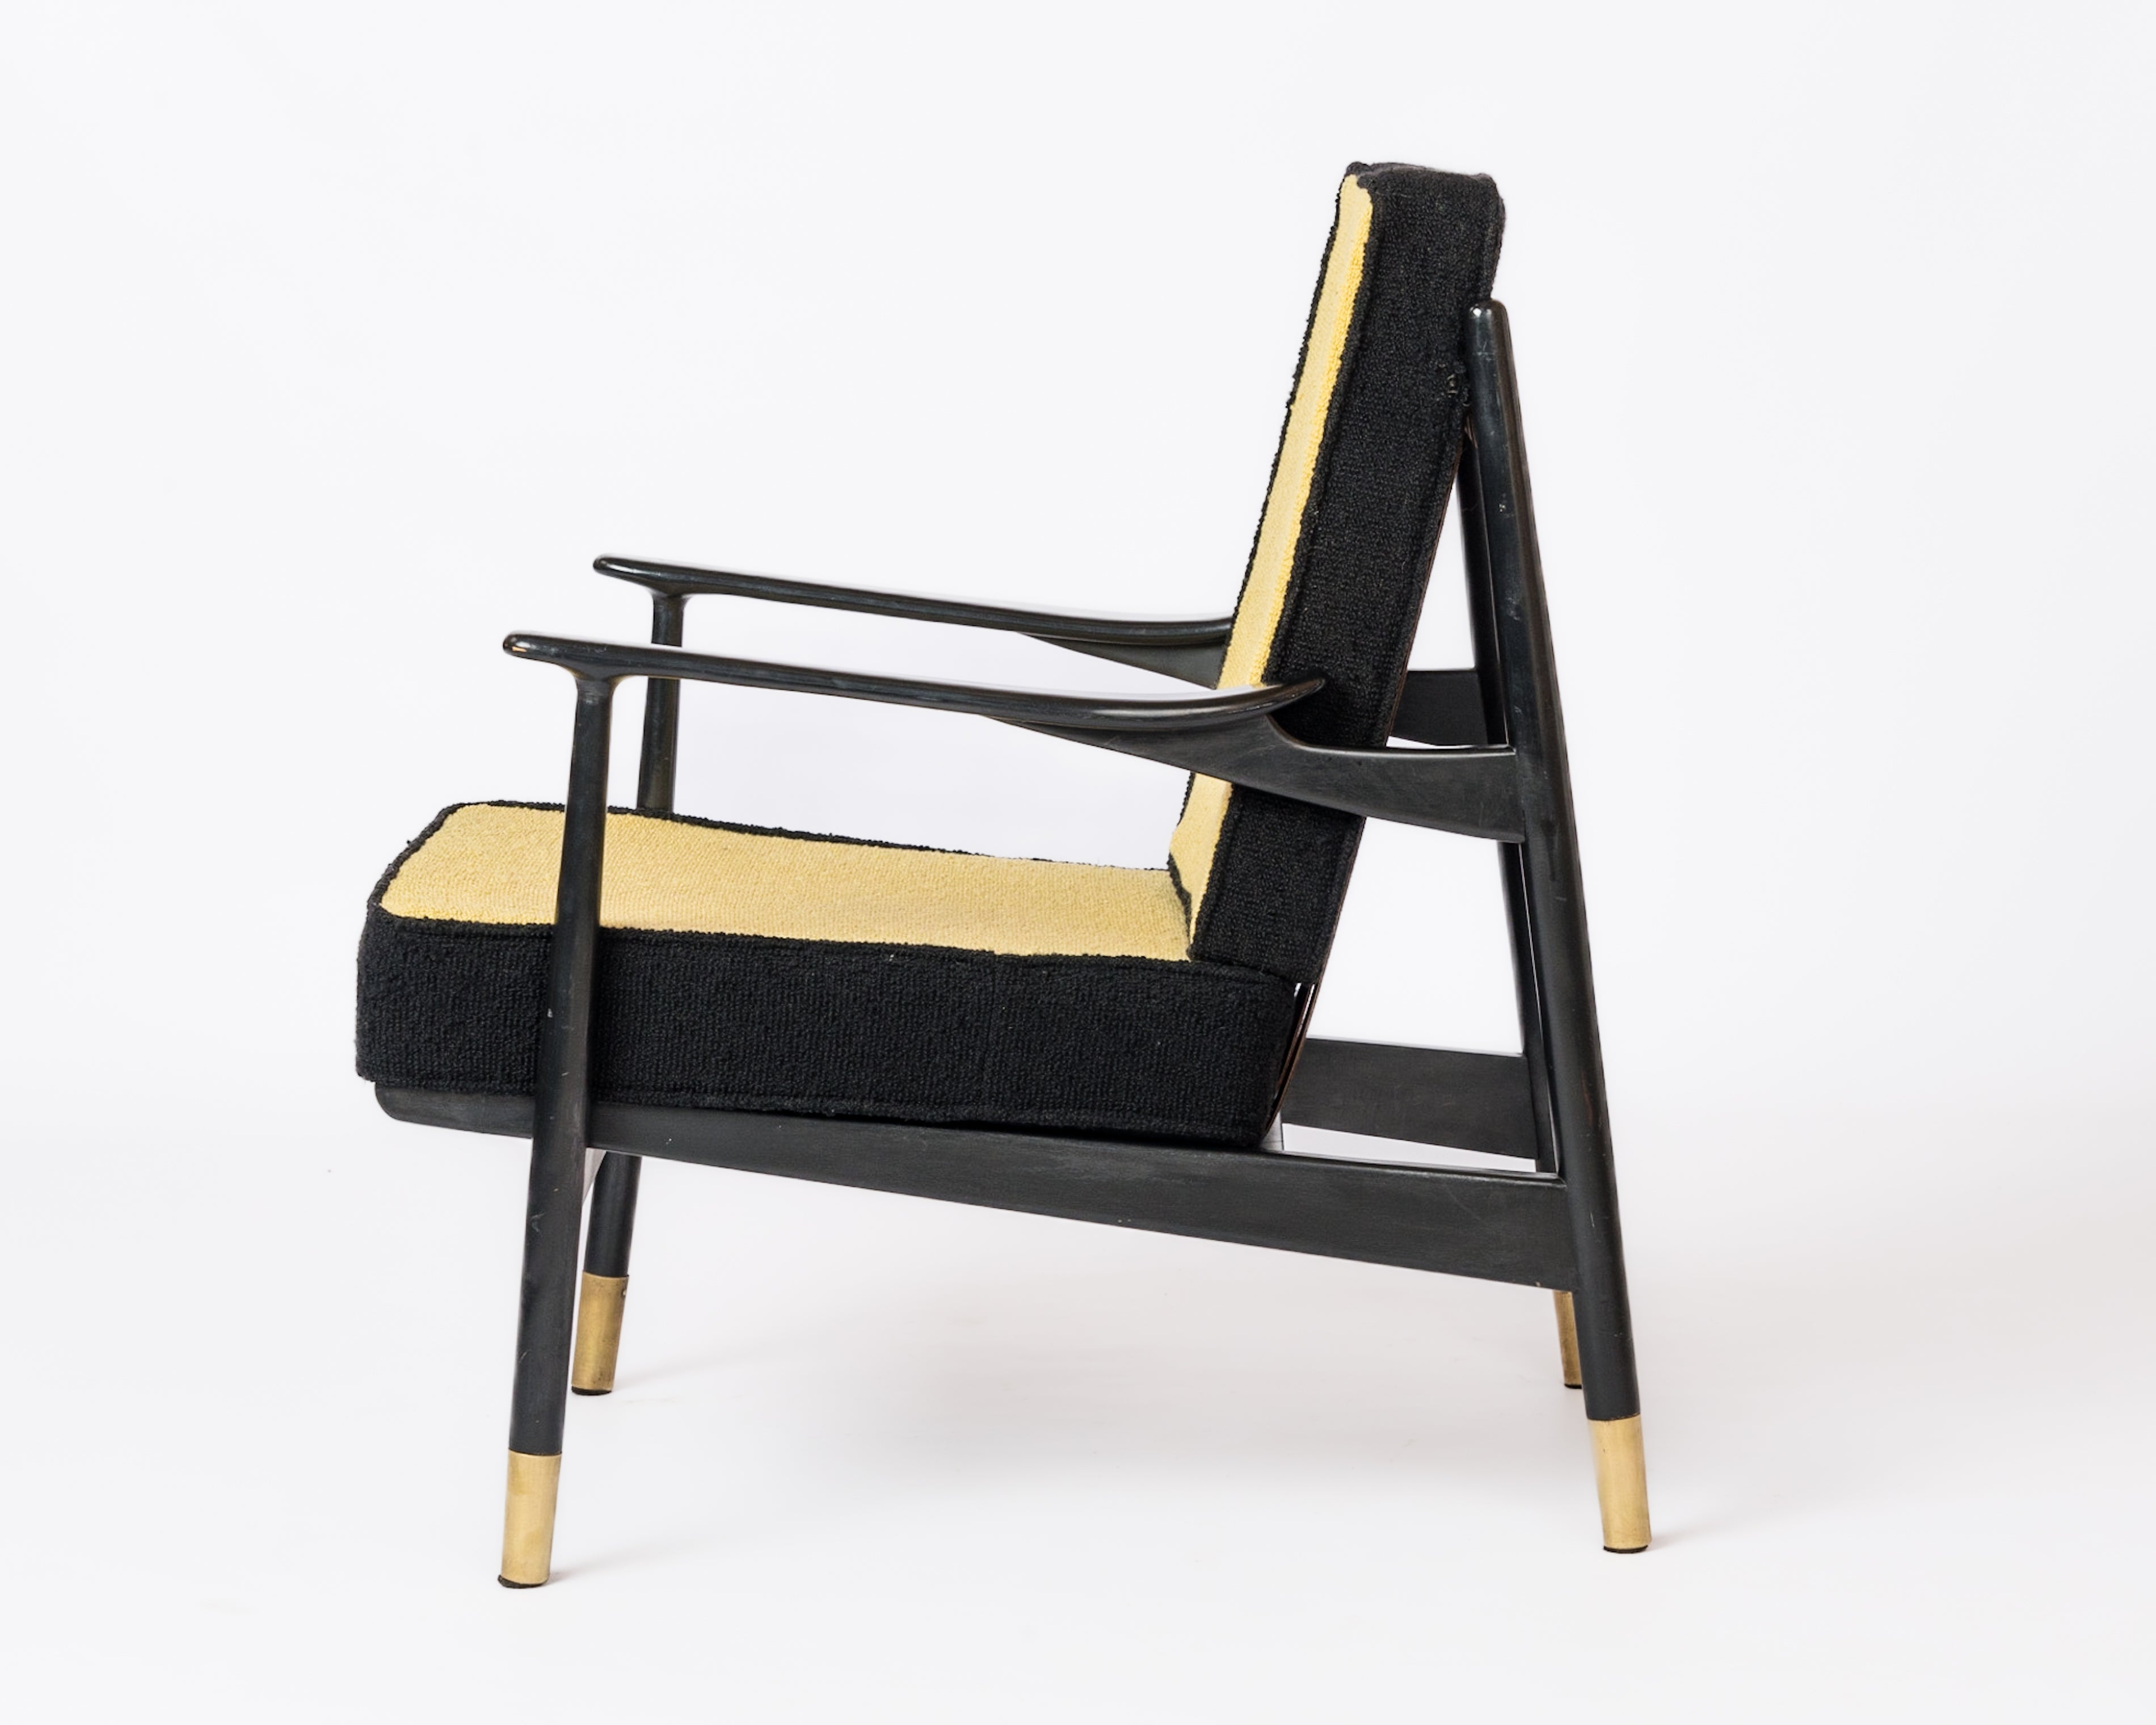 Mid Century Black Lacquered Wood Armchair in style of Gio Ponti - Italy 1960's